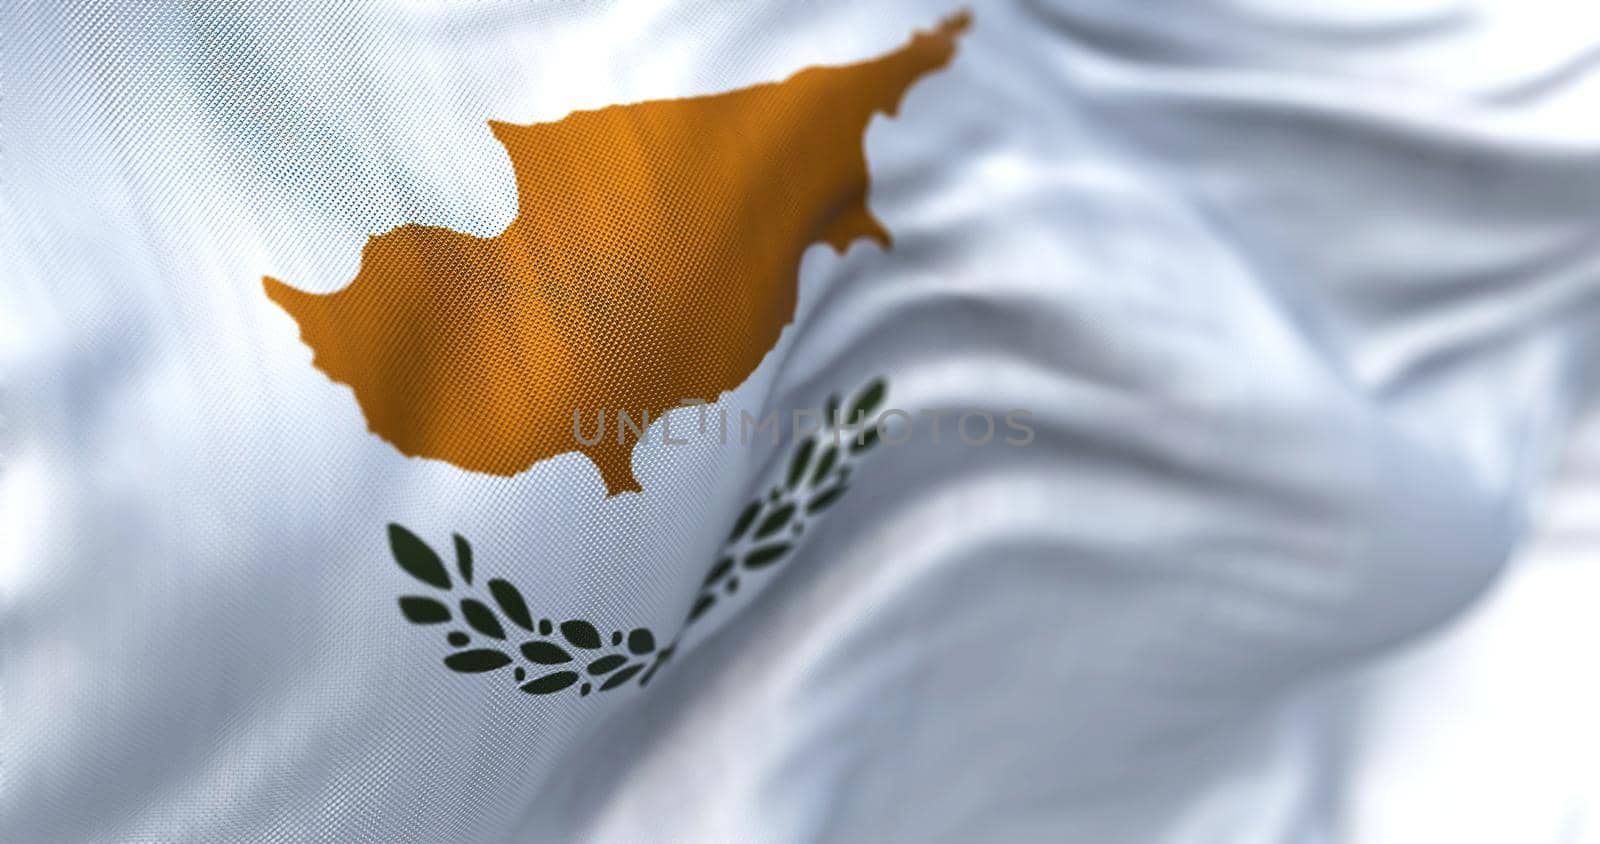 Close-up view of the cypriot national flag waving in the wind. The Republic of Cyprus is an island country in the eastern Mediterranean Sea. Fabric textured background. Selective focus